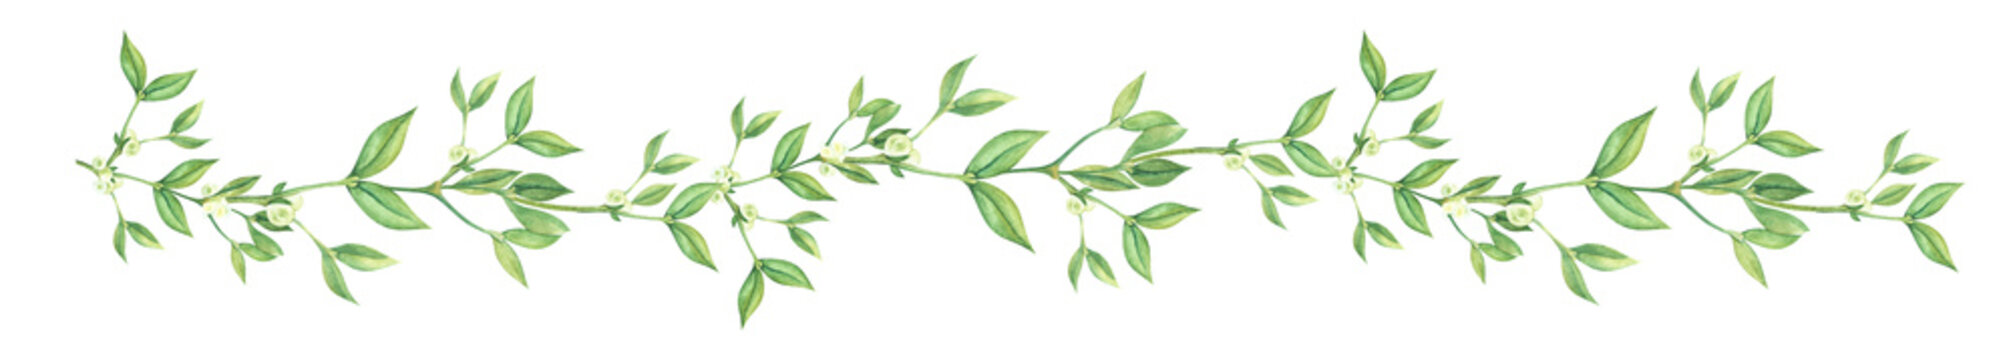 Elongated border decorative element. Longvine Mistletoe ivy branch with small white berries and tiny leaves. Hand painted watercolor illustration. Colorful light cartoon drawing isolated on white